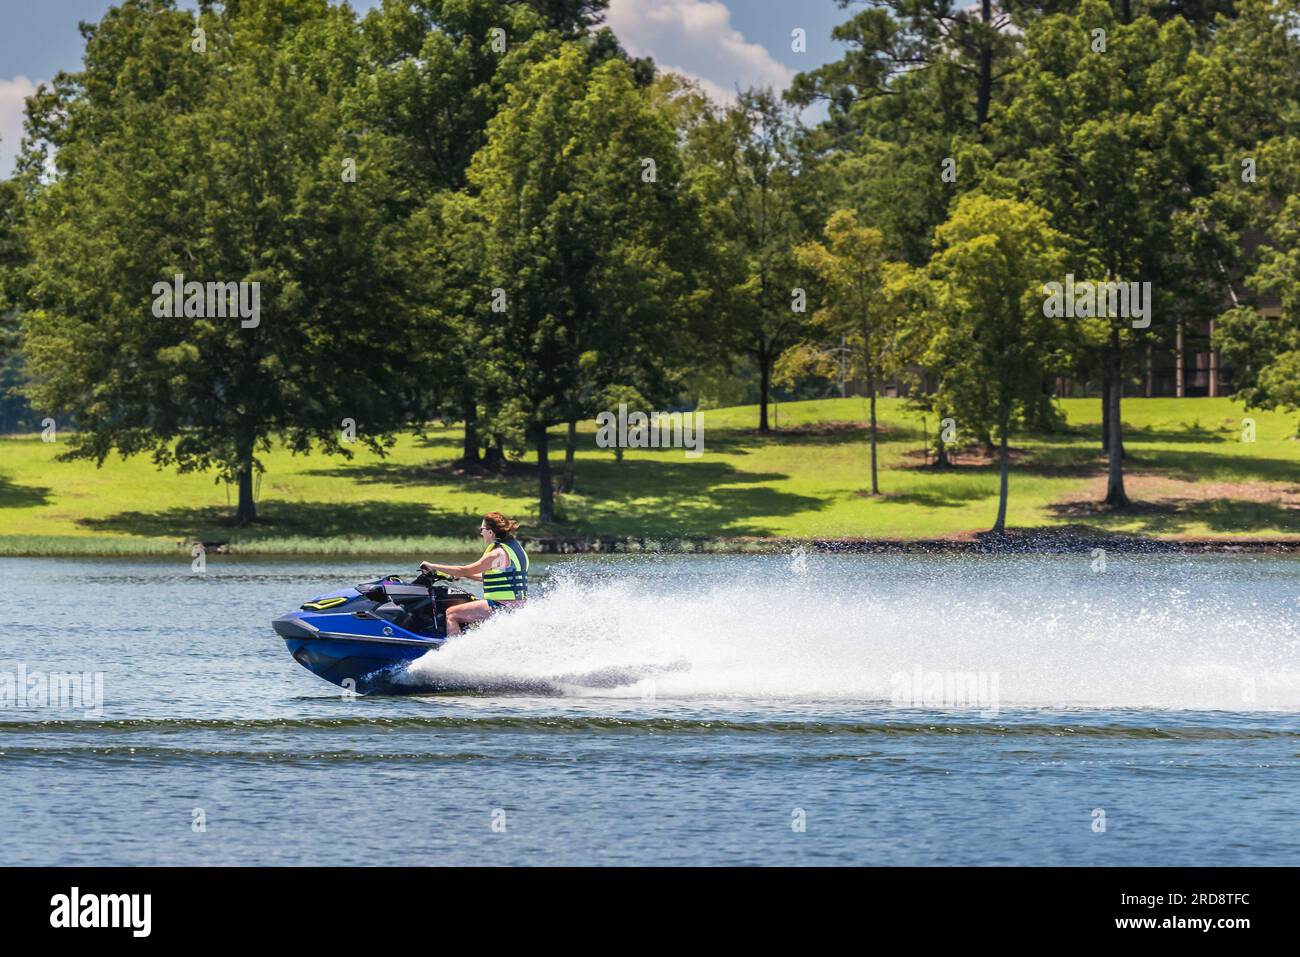 Lady riding jet ski and enjoying summer day on Lake Oconee, Georgia. Riding personal watercraft is a popular form of water recreation. Stock Photo